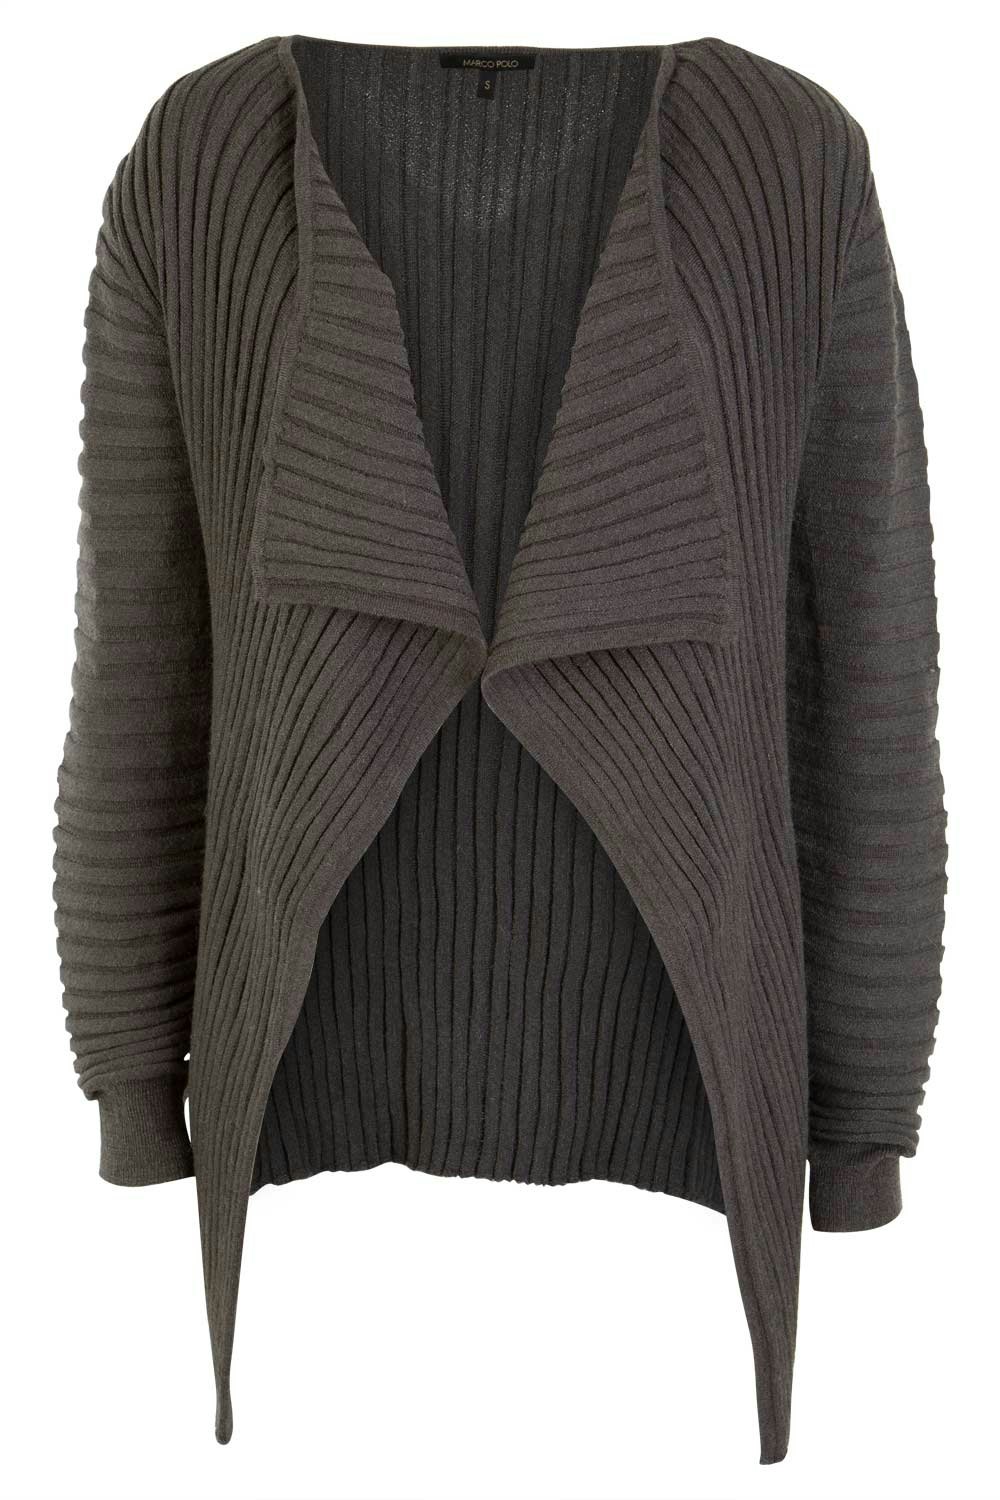 Marco Polo clothing Self Stripe L/S Cardi - Womens Cardigans at ...